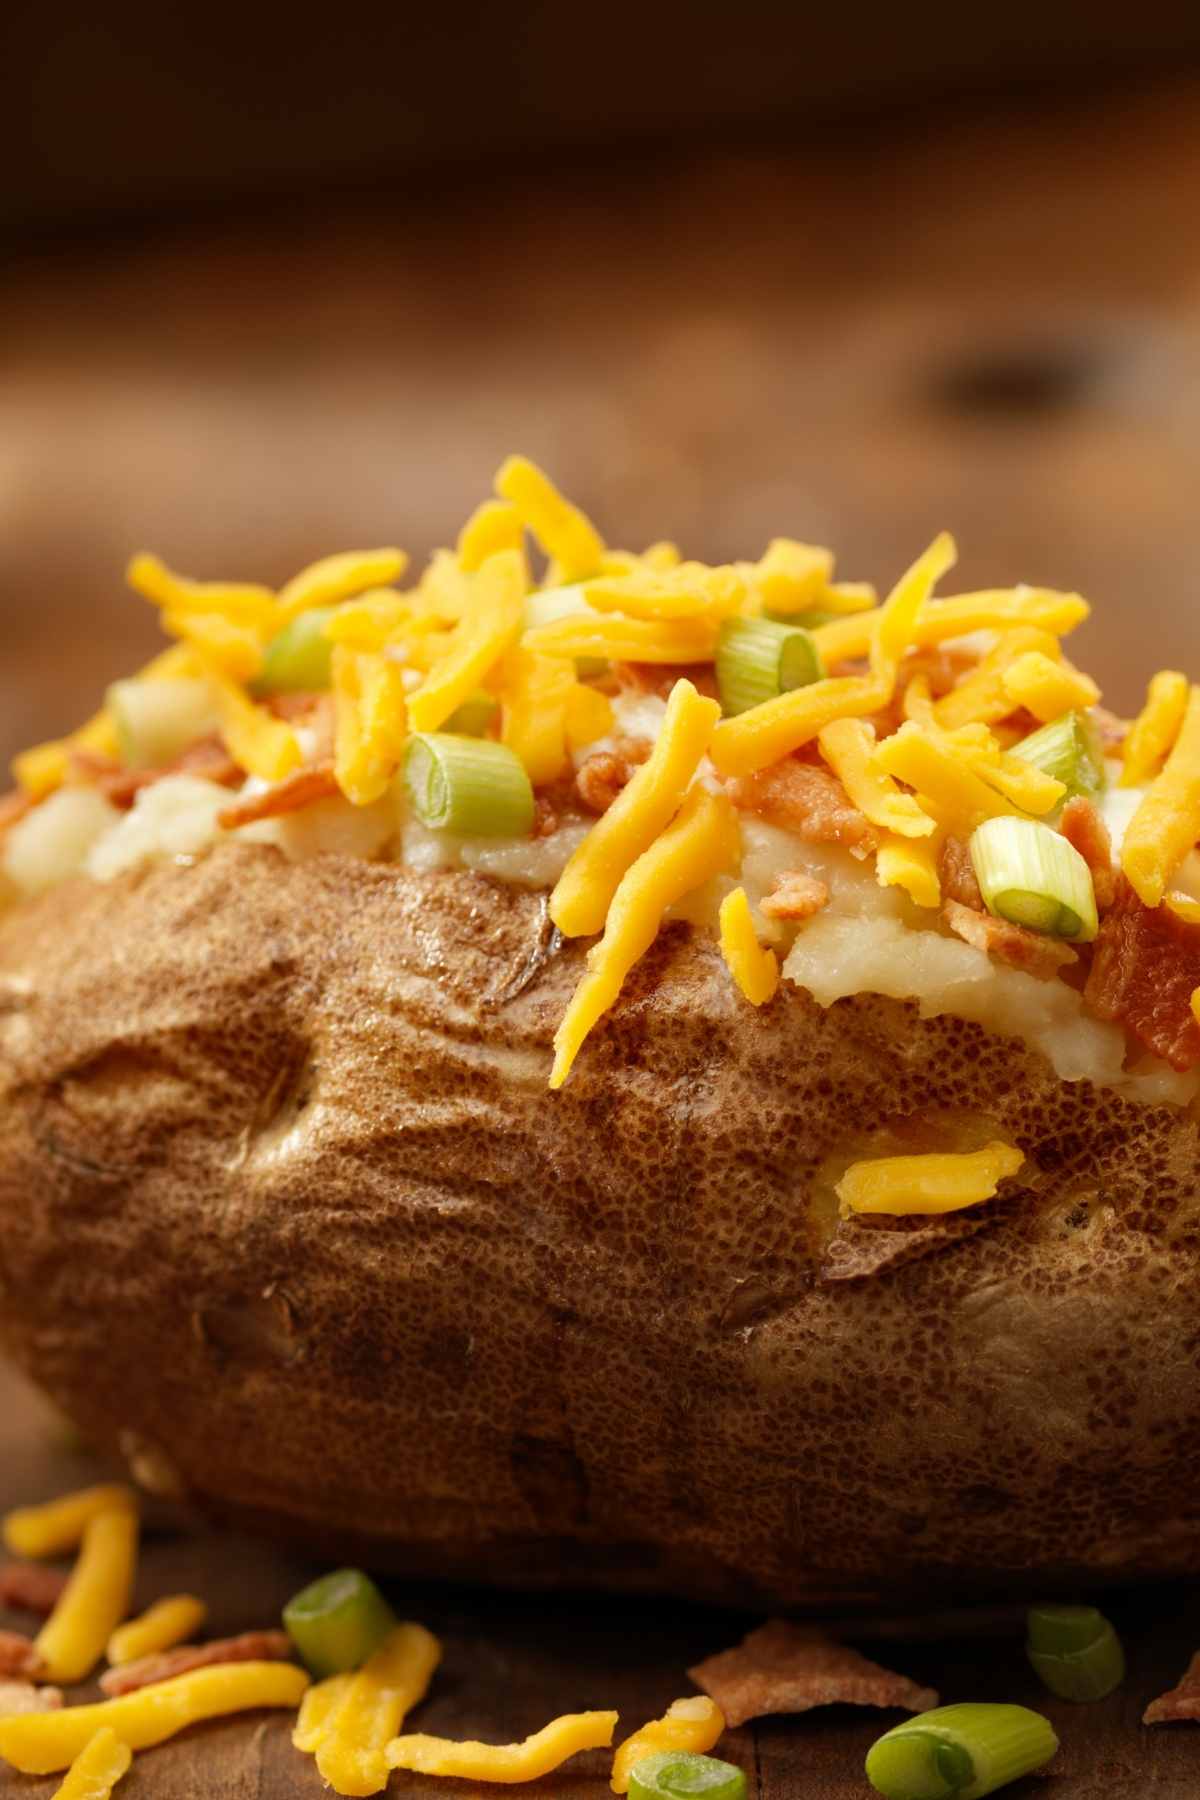 The perfect baked potato is crispy on the outside and pillowy in the middle. In this post, you’ll learn the right temperature for potatoes and how long to bake them for the best result. Enjoy the perfect baked potato every time!